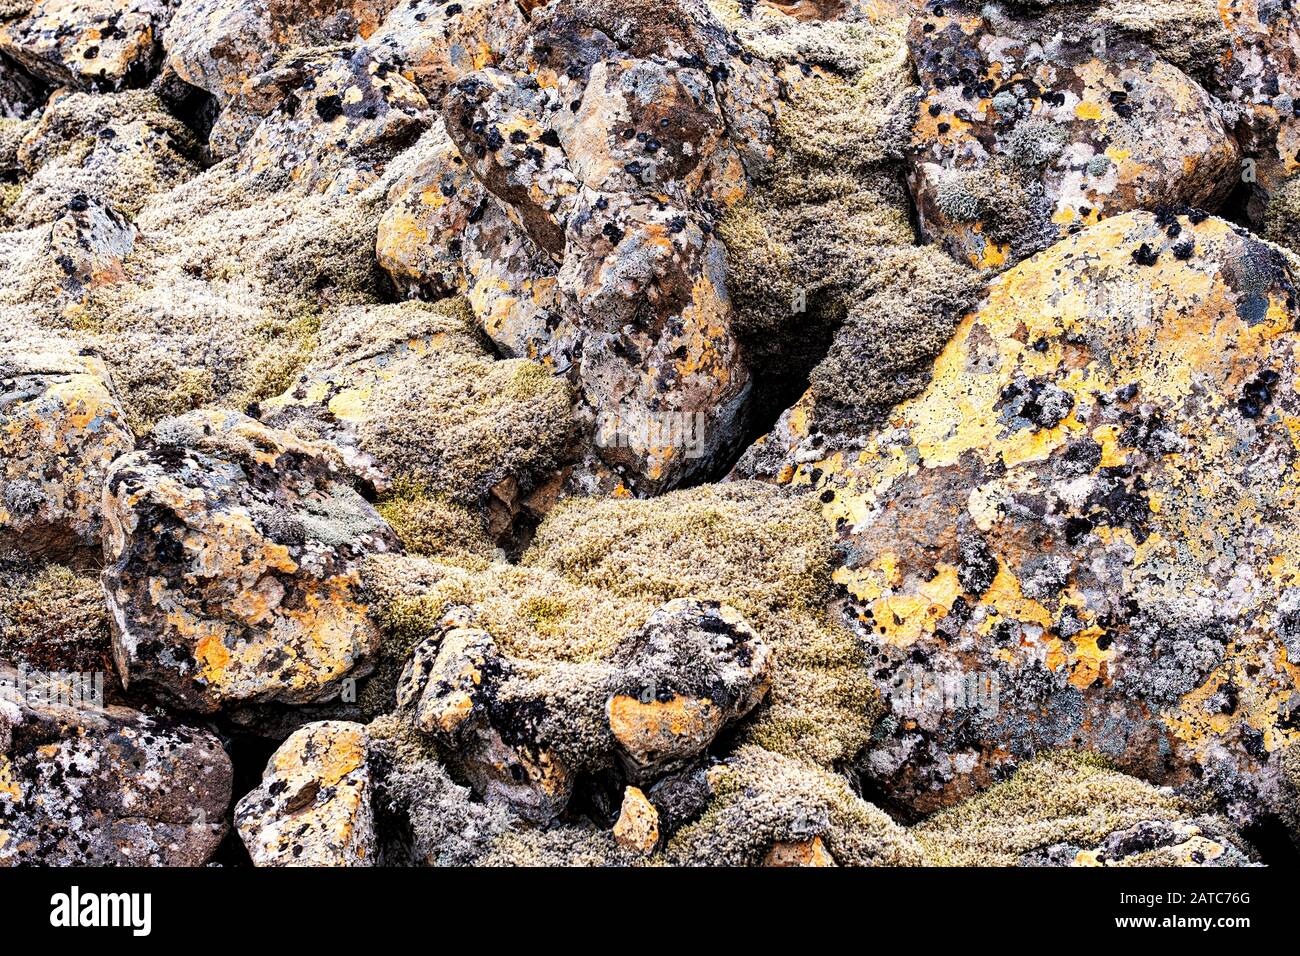 Colorful and abstract lichen and moss formation on rocks Stock Photo